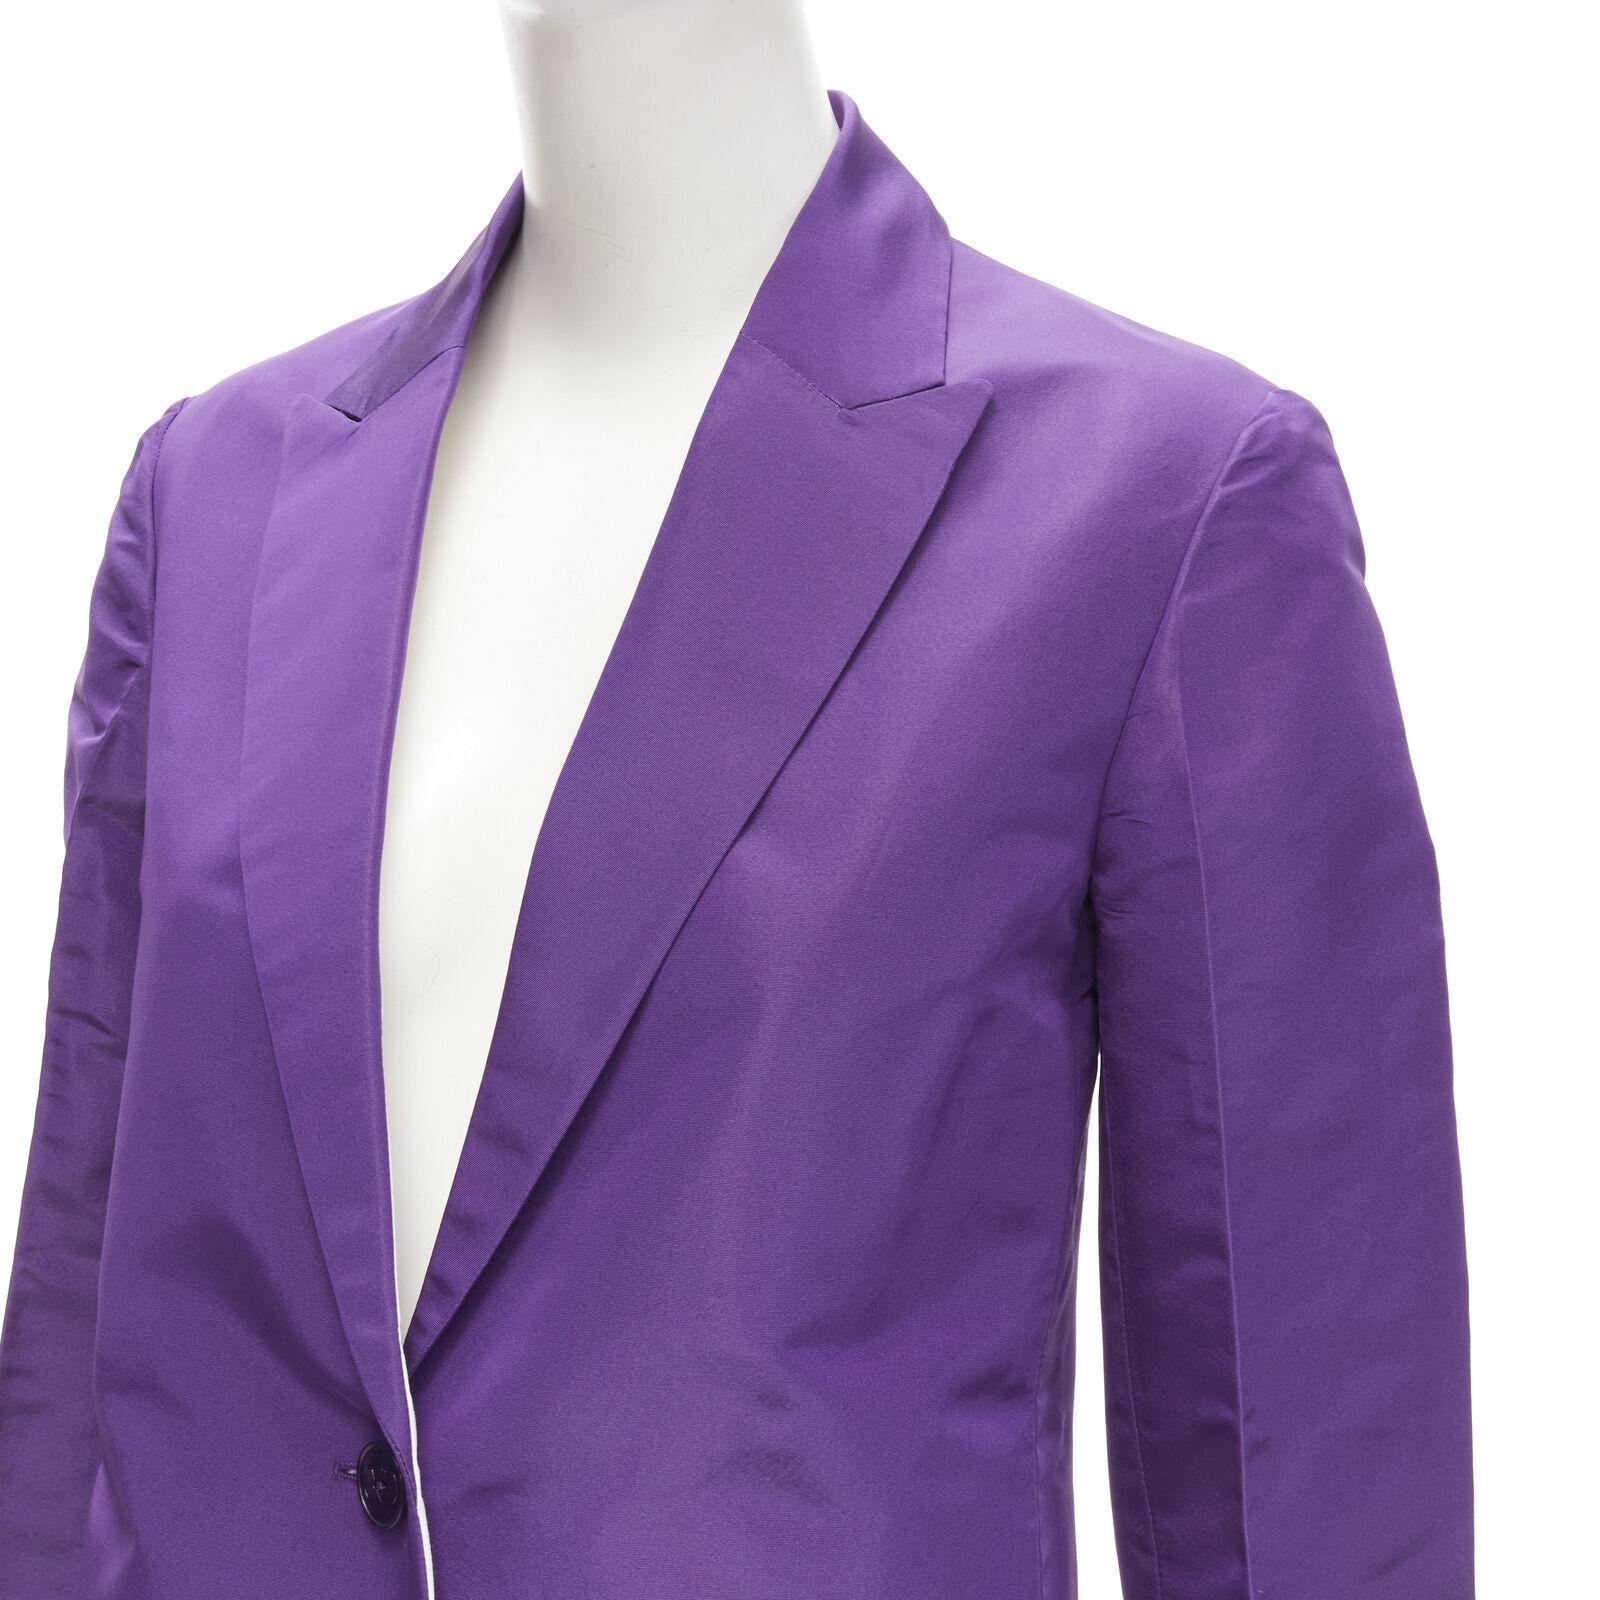 VALENTINO 2022 Runway purple 100% silk hidden waist drawstring blazer IT36 XS
Reference: AAWC/A00289
Brand: Valentino
Designer: Pier Paolo Piccioli
Collection: 2022 - Runway
Material: 100% Silk
Color: Purple
Pattern: Solid
Closure: Button
Lining: